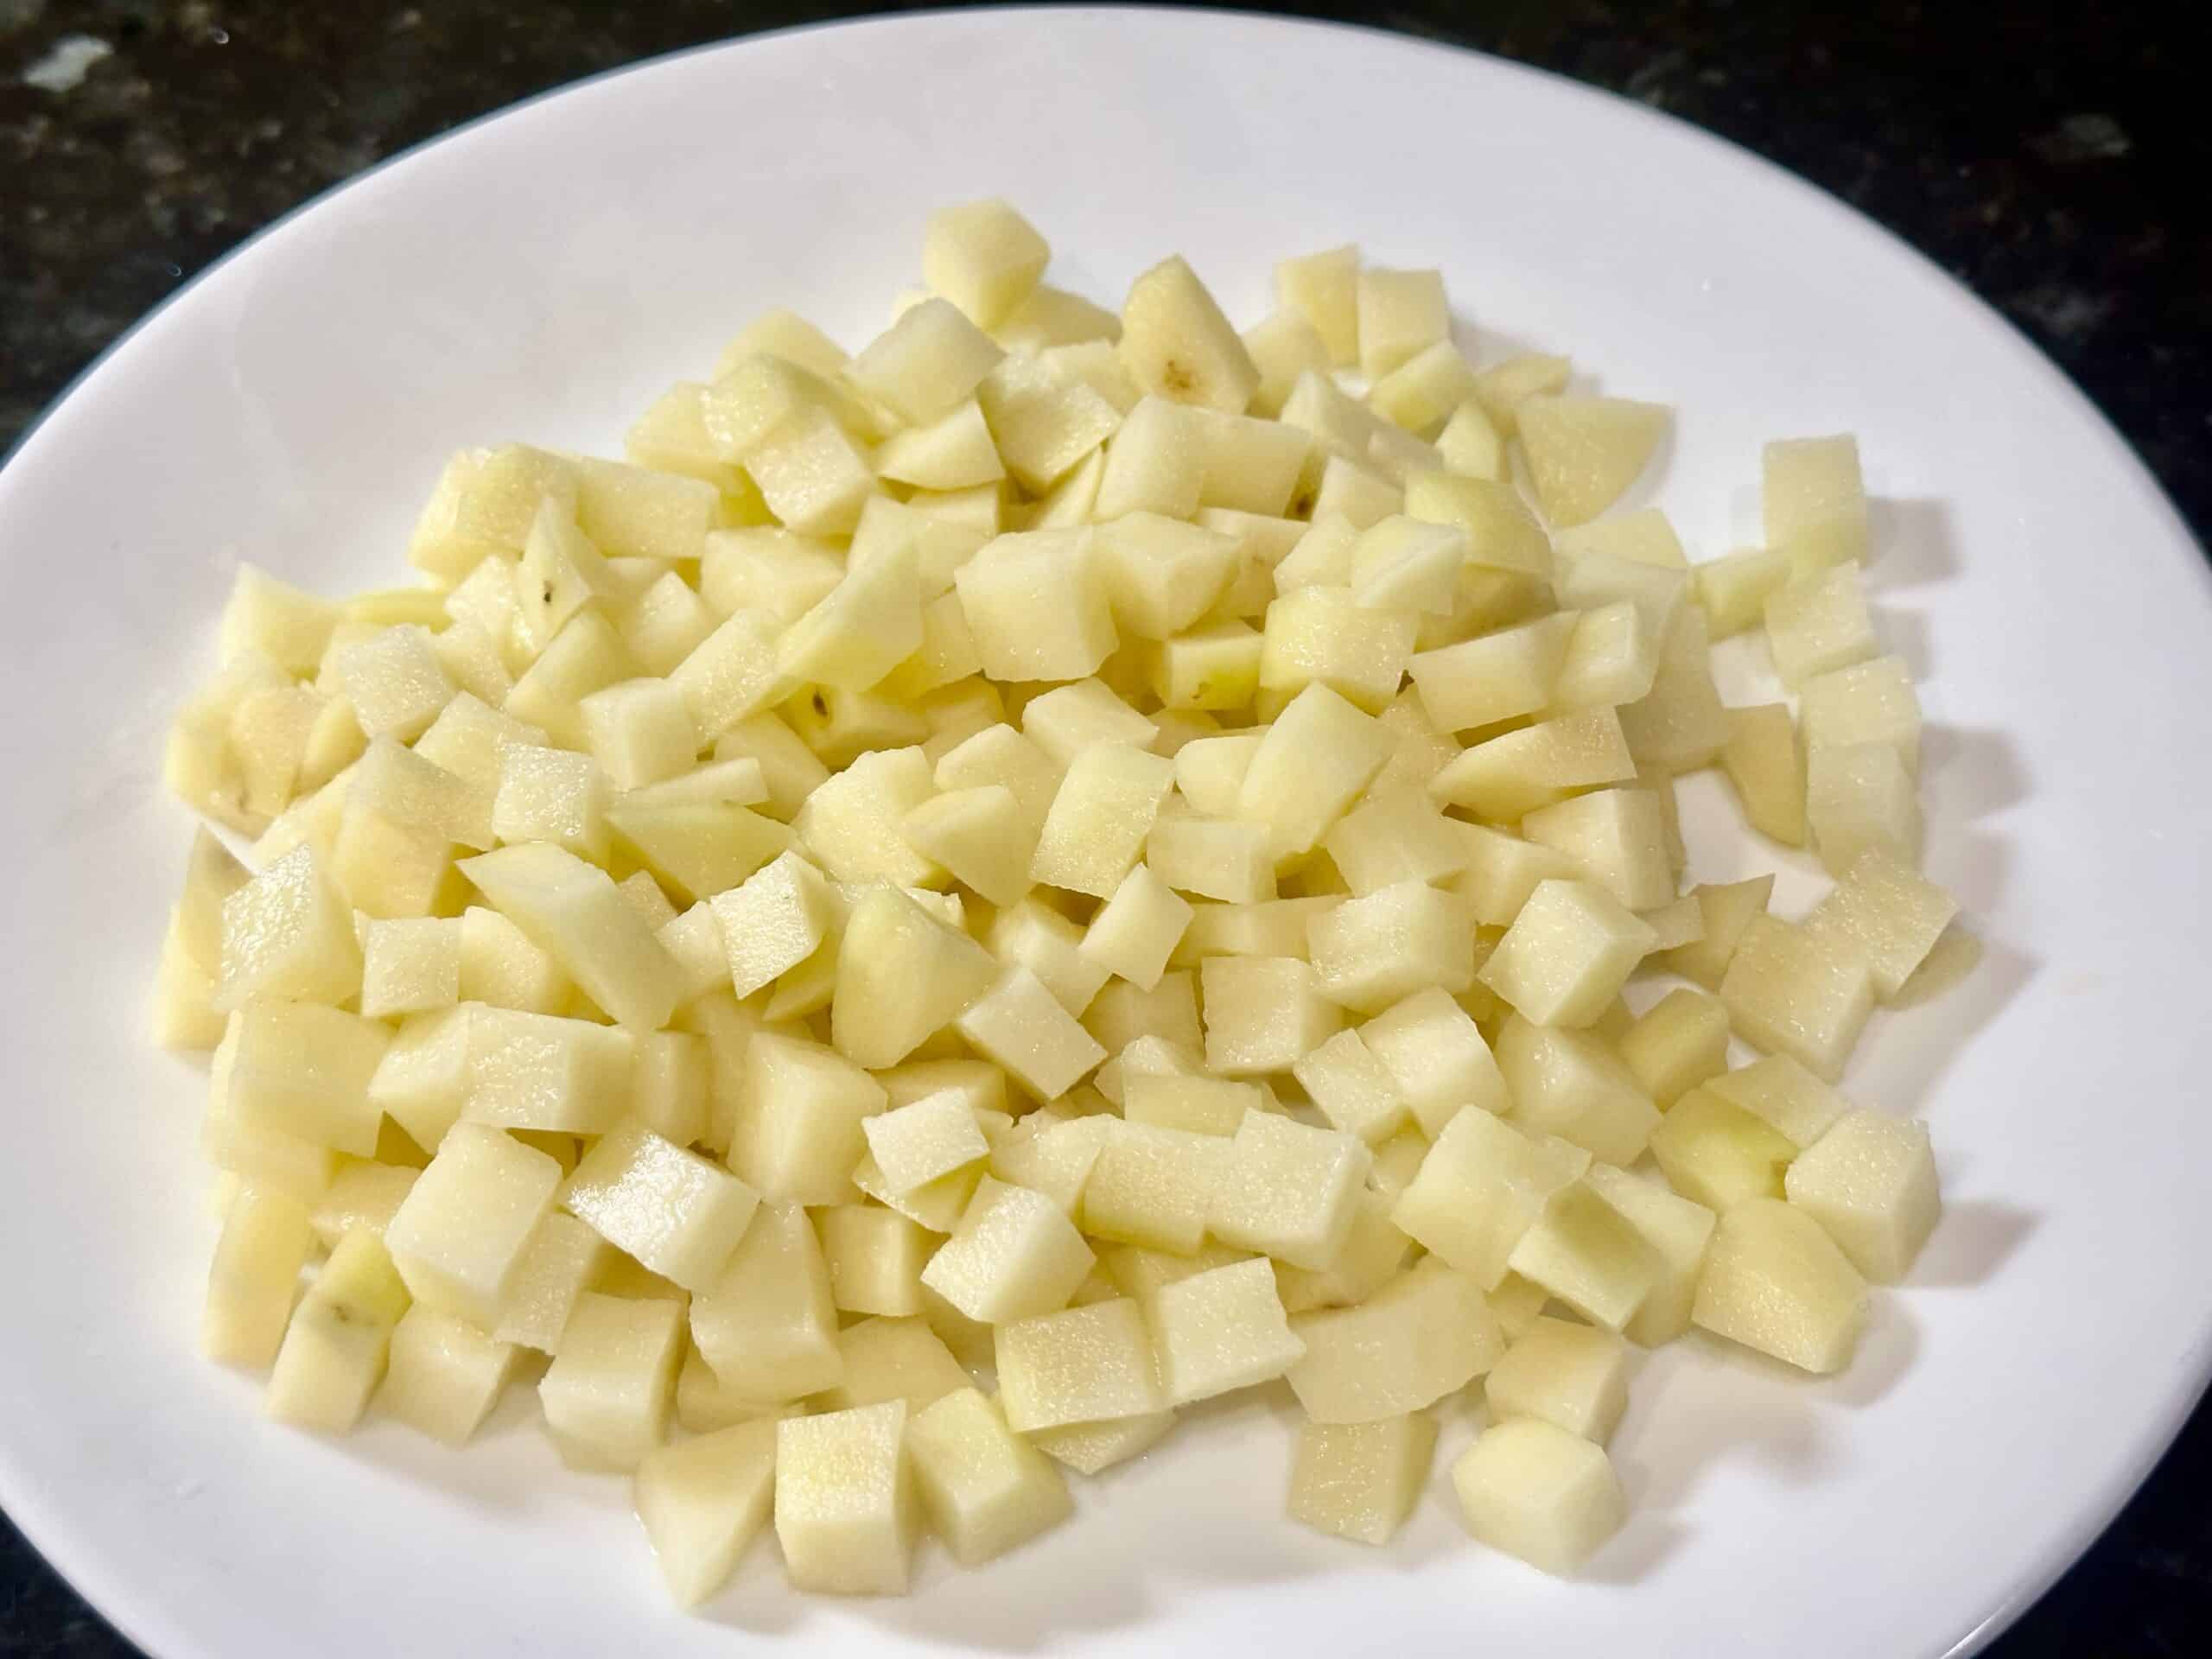 Diced potatoes on a white plate.